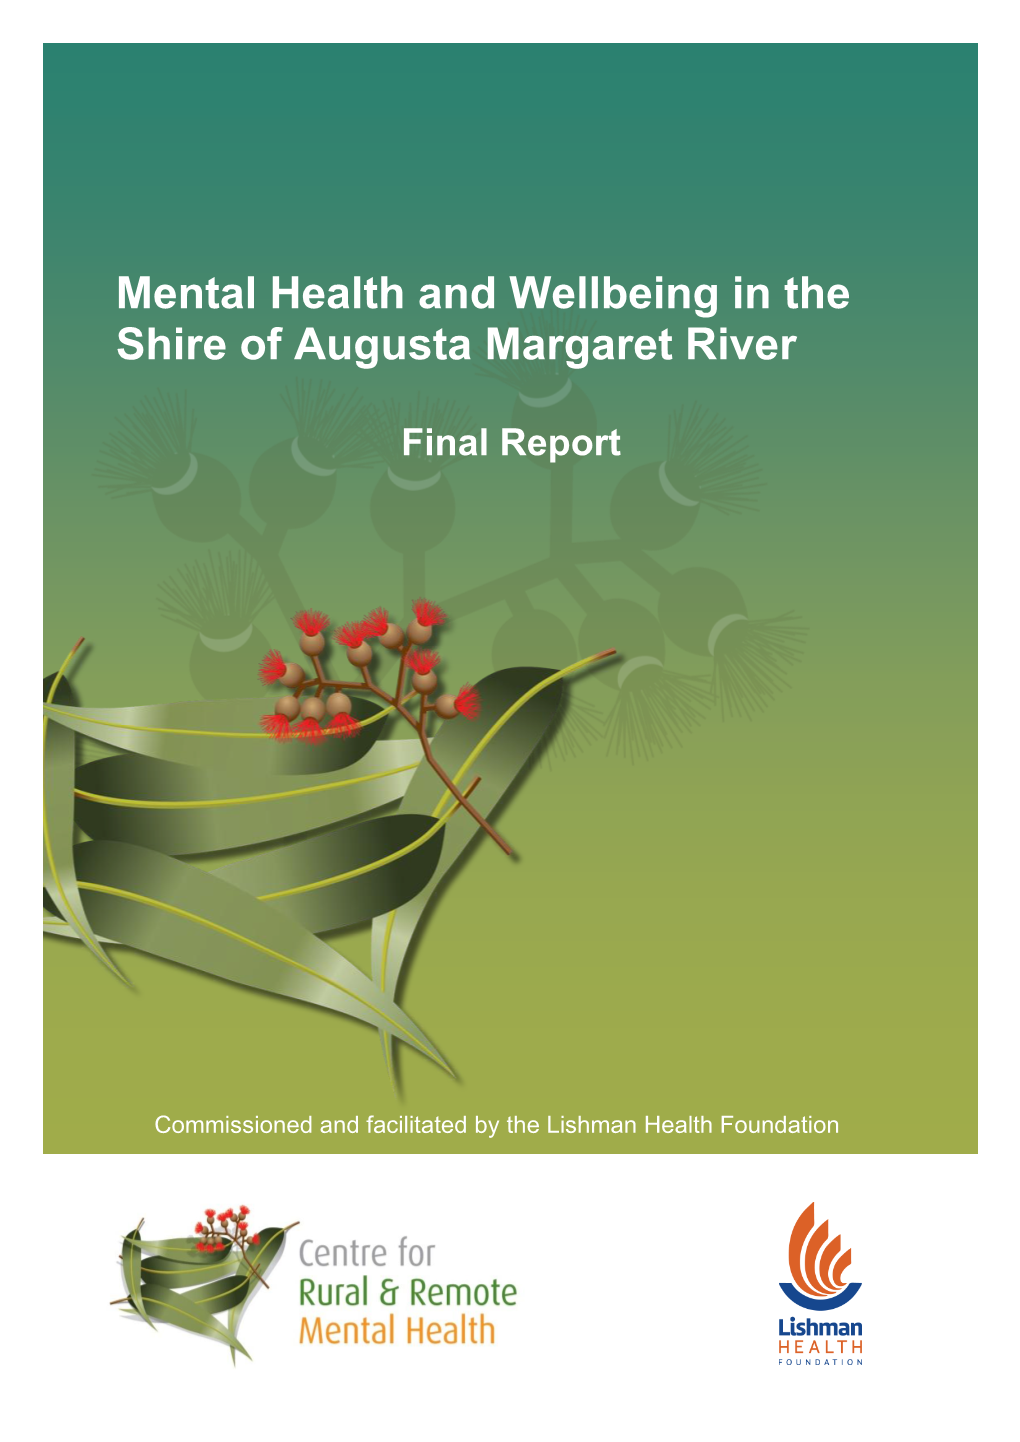 Mental Health and Wellbeing in the Shire of Augusta Margaret River